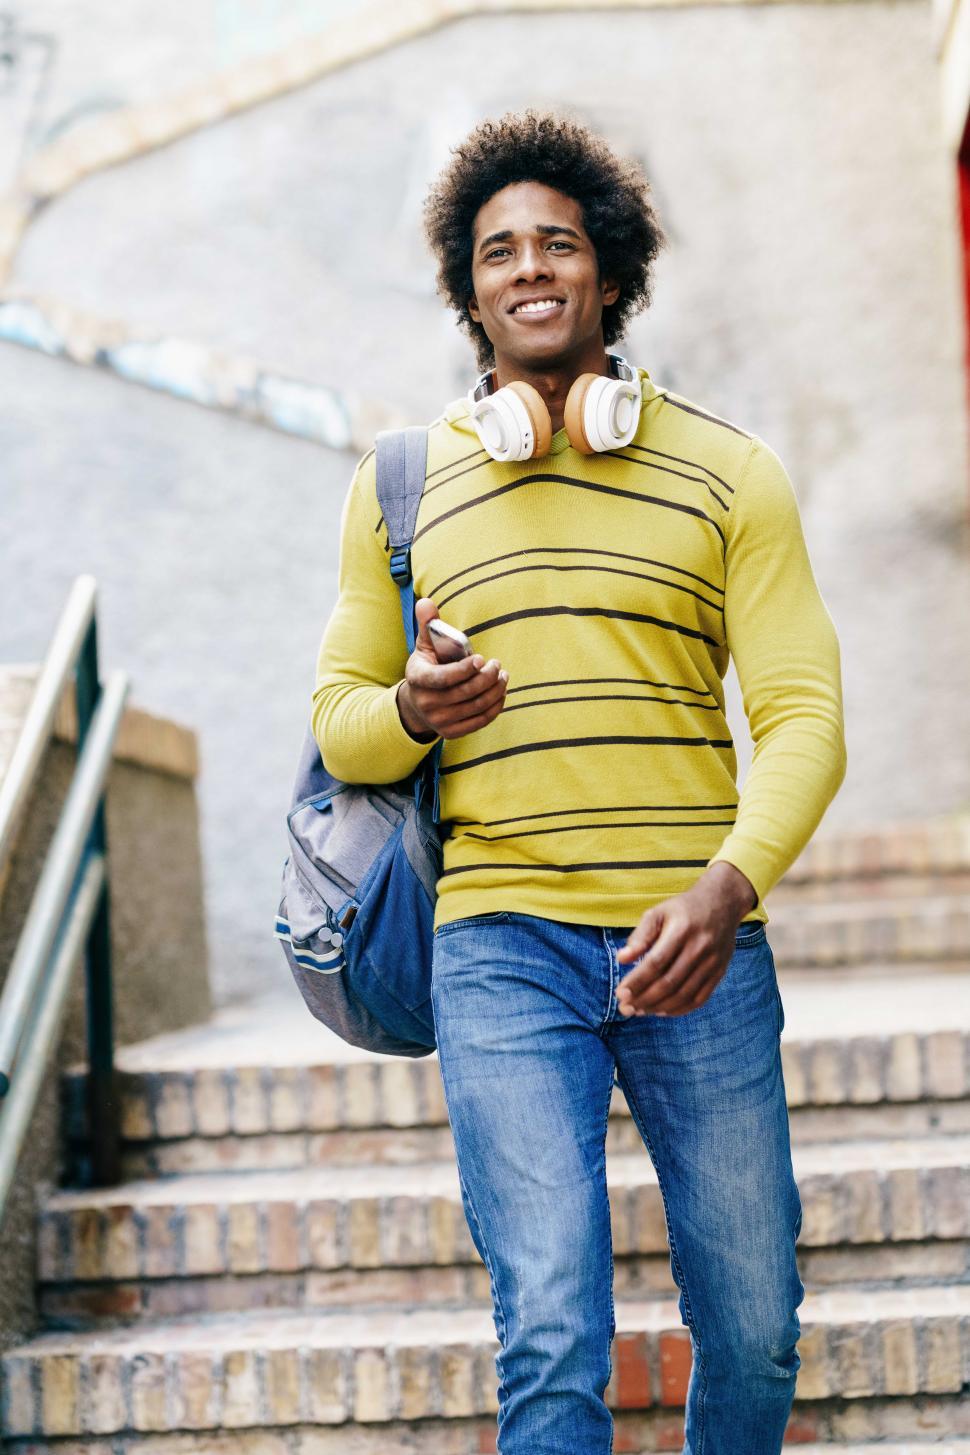 Free Image of Black man with afro hair sightseeing in Granada 